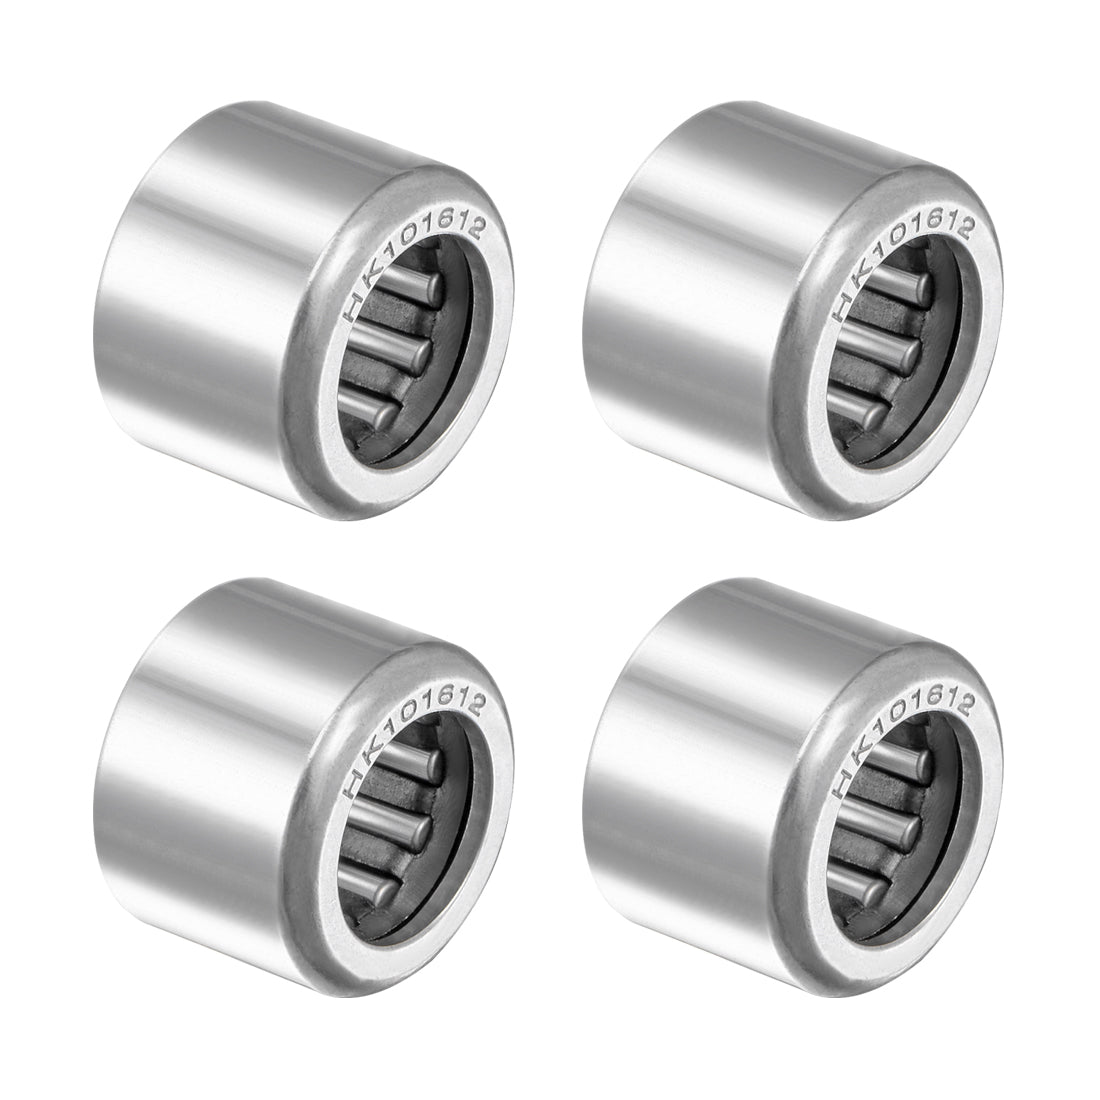 uxcell Uxcell HK101612 Drawn Cup Needle Roller Bearings 10mm Bore, 16mm OD, 12mm Width 4pcs